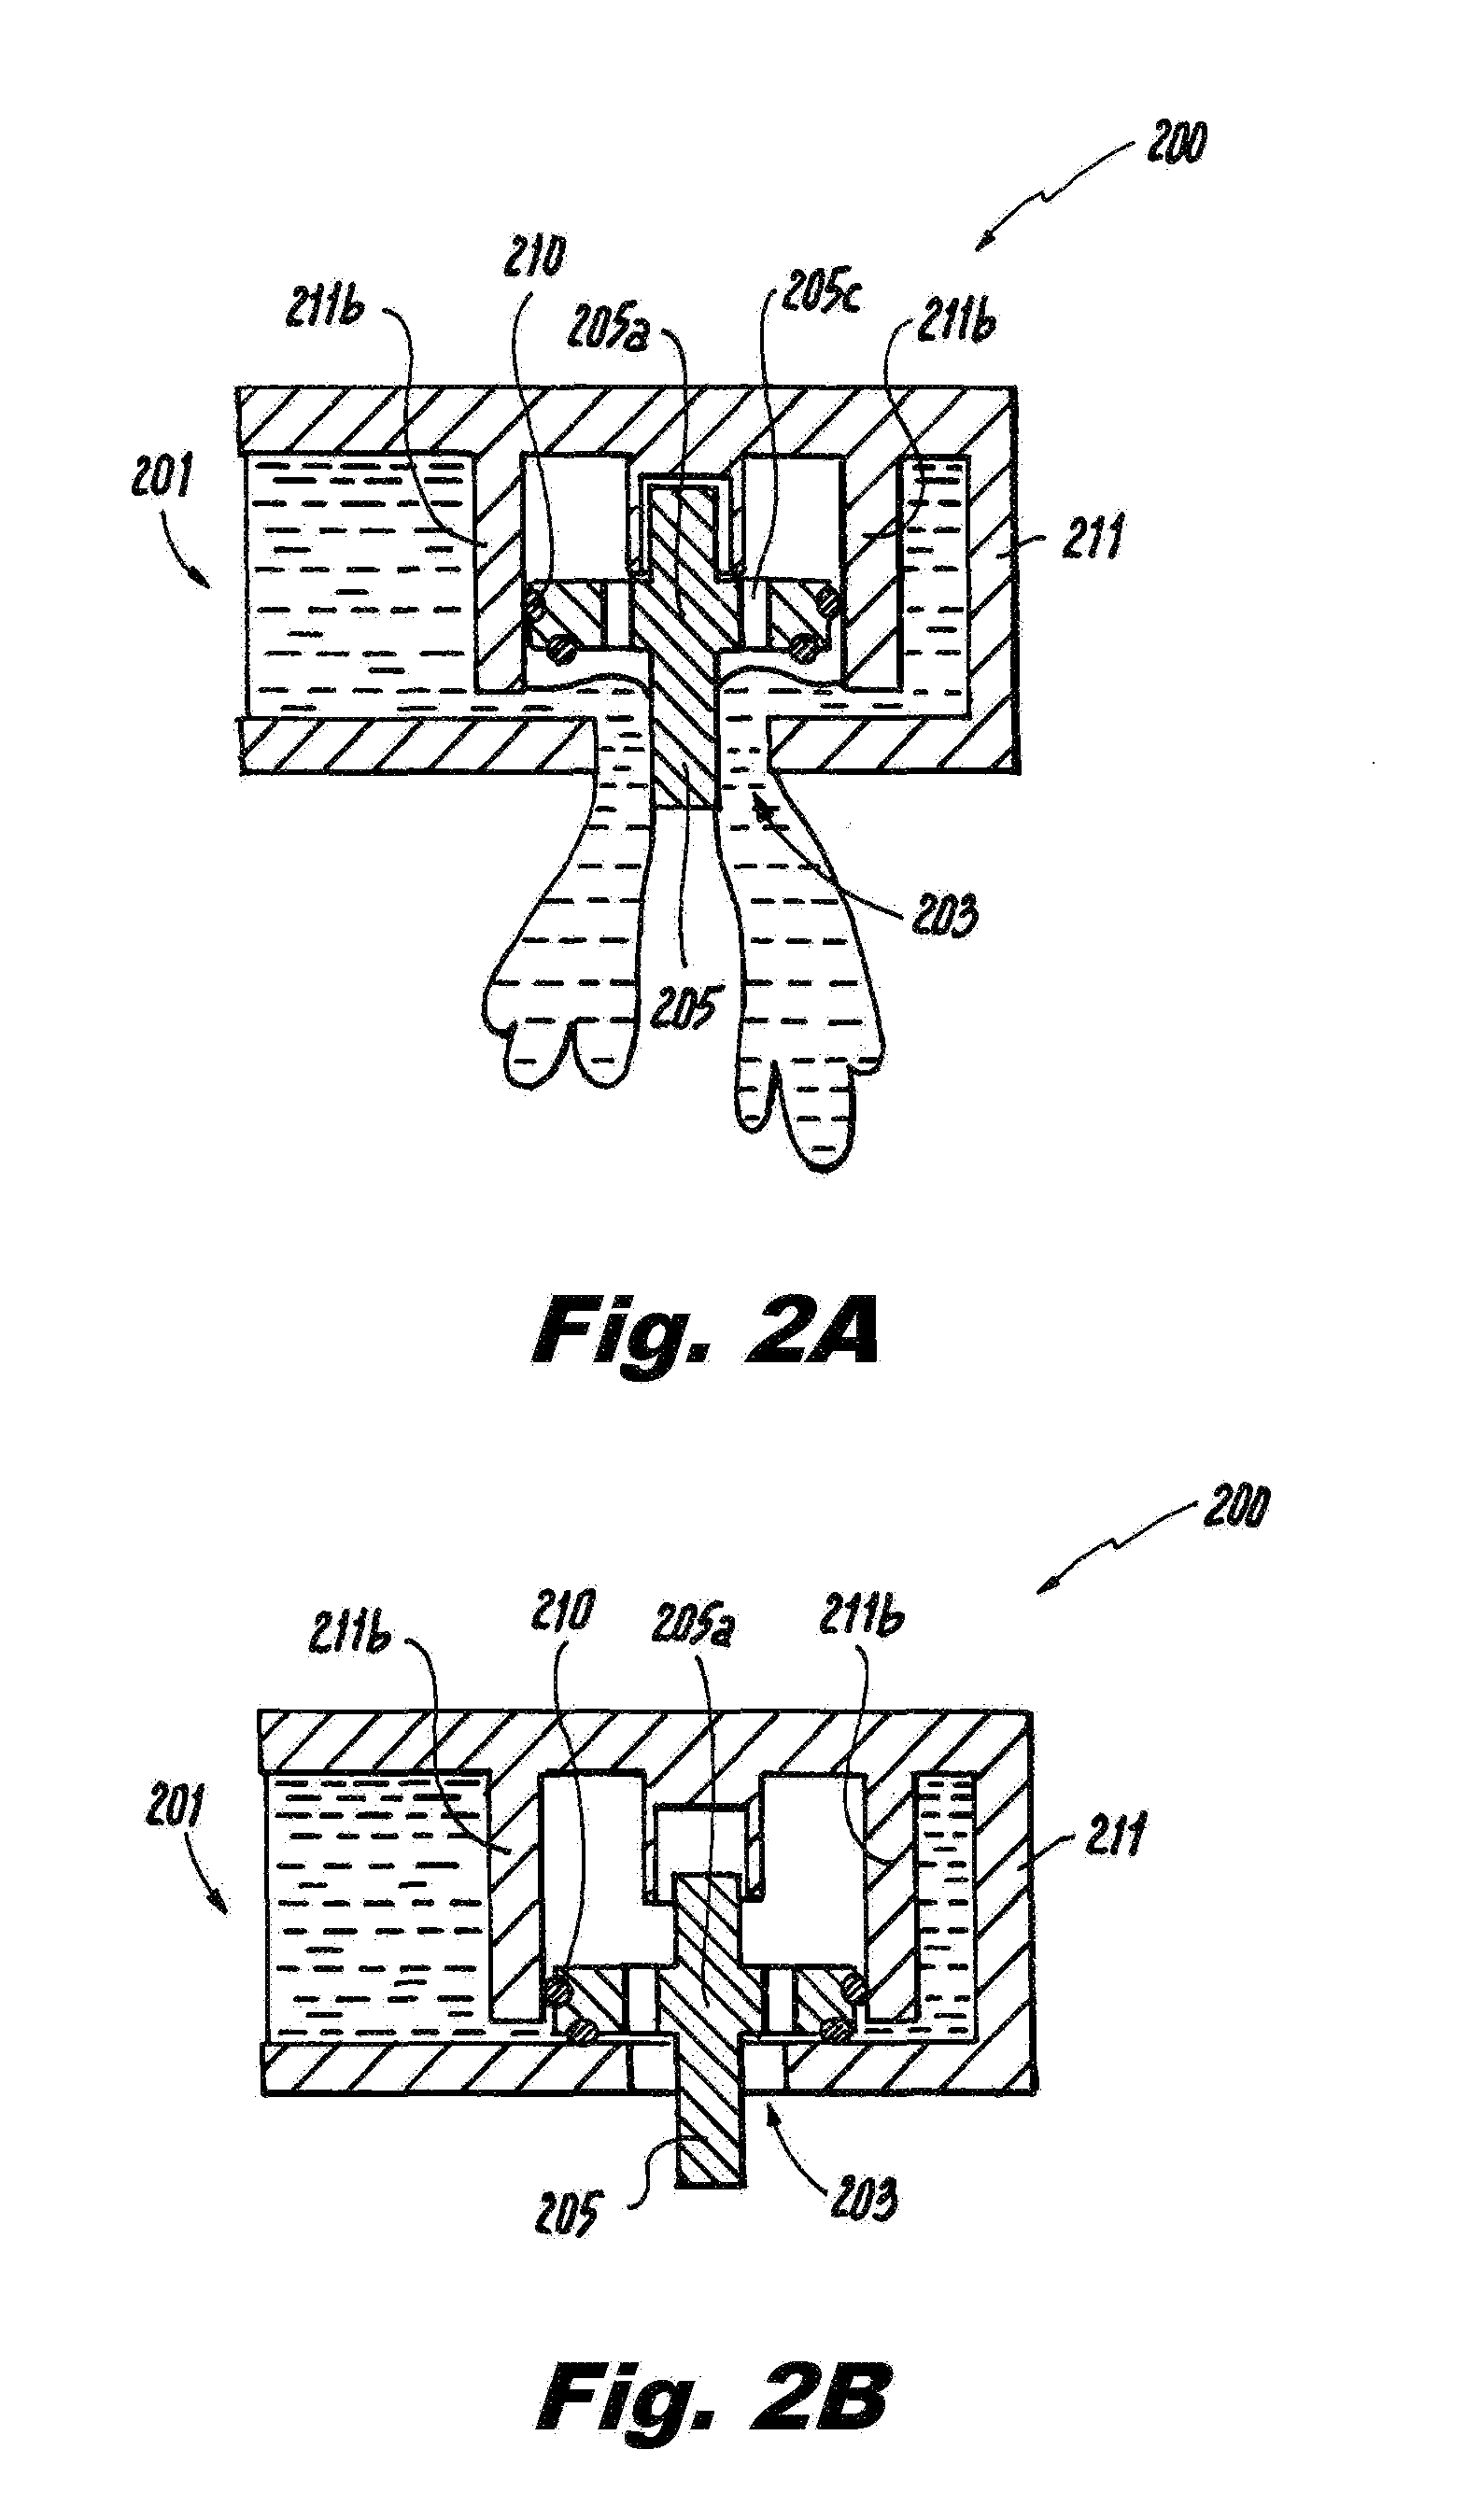 Shut off valves and components thereof for ecology fuel return systems